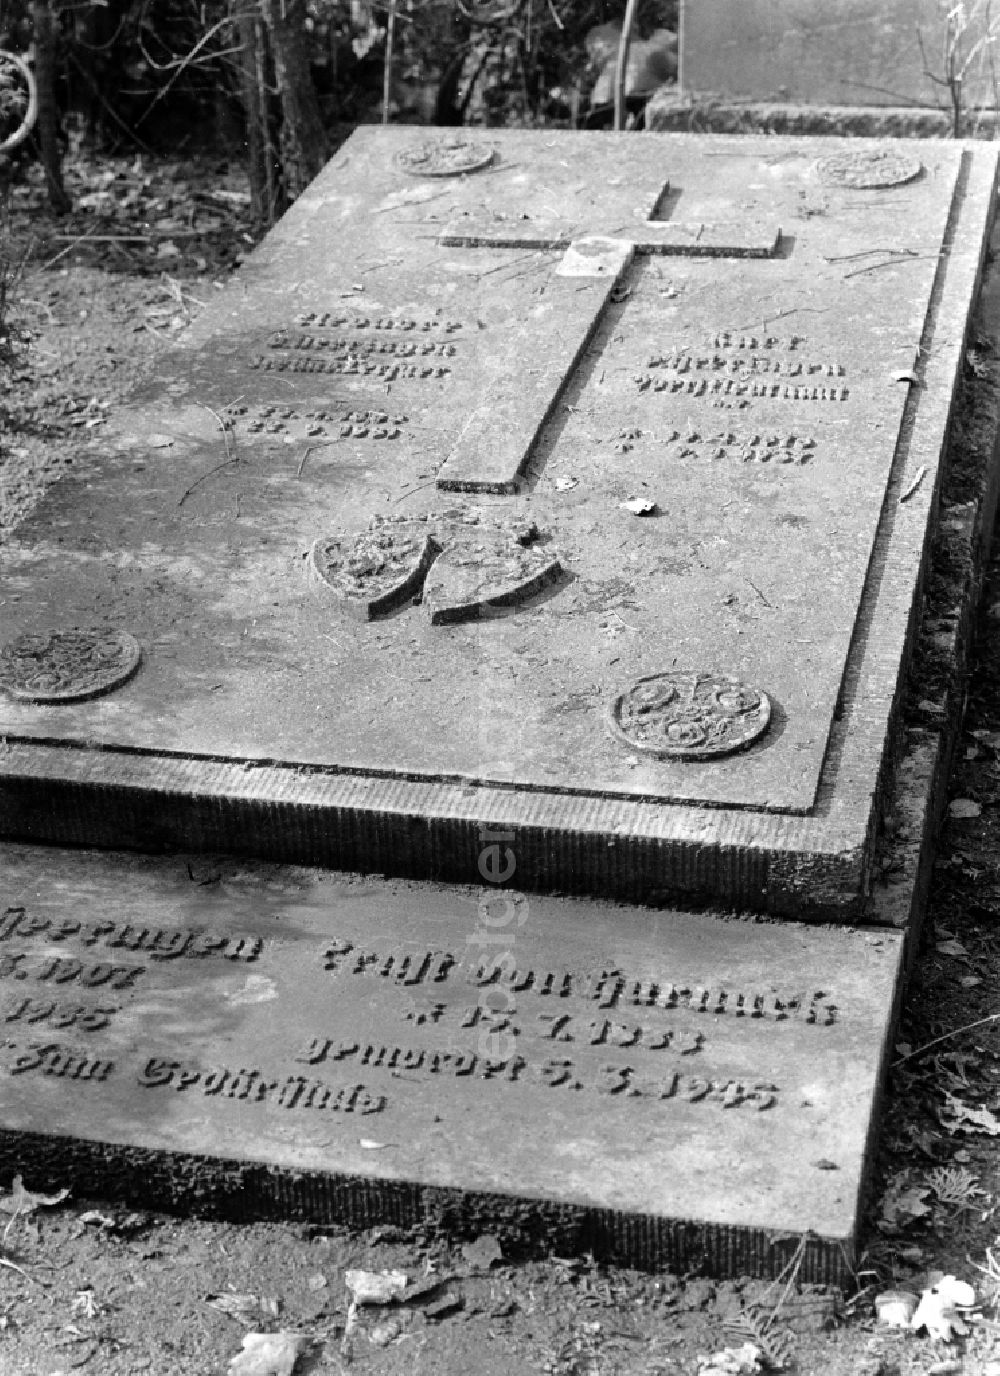 GDR photo archive: Potsdam - Memorial stone at Ernst von Harnack at the grave stone of the family of Heeringen on the Bornstedter Cemetery in Potsdam in East Germany